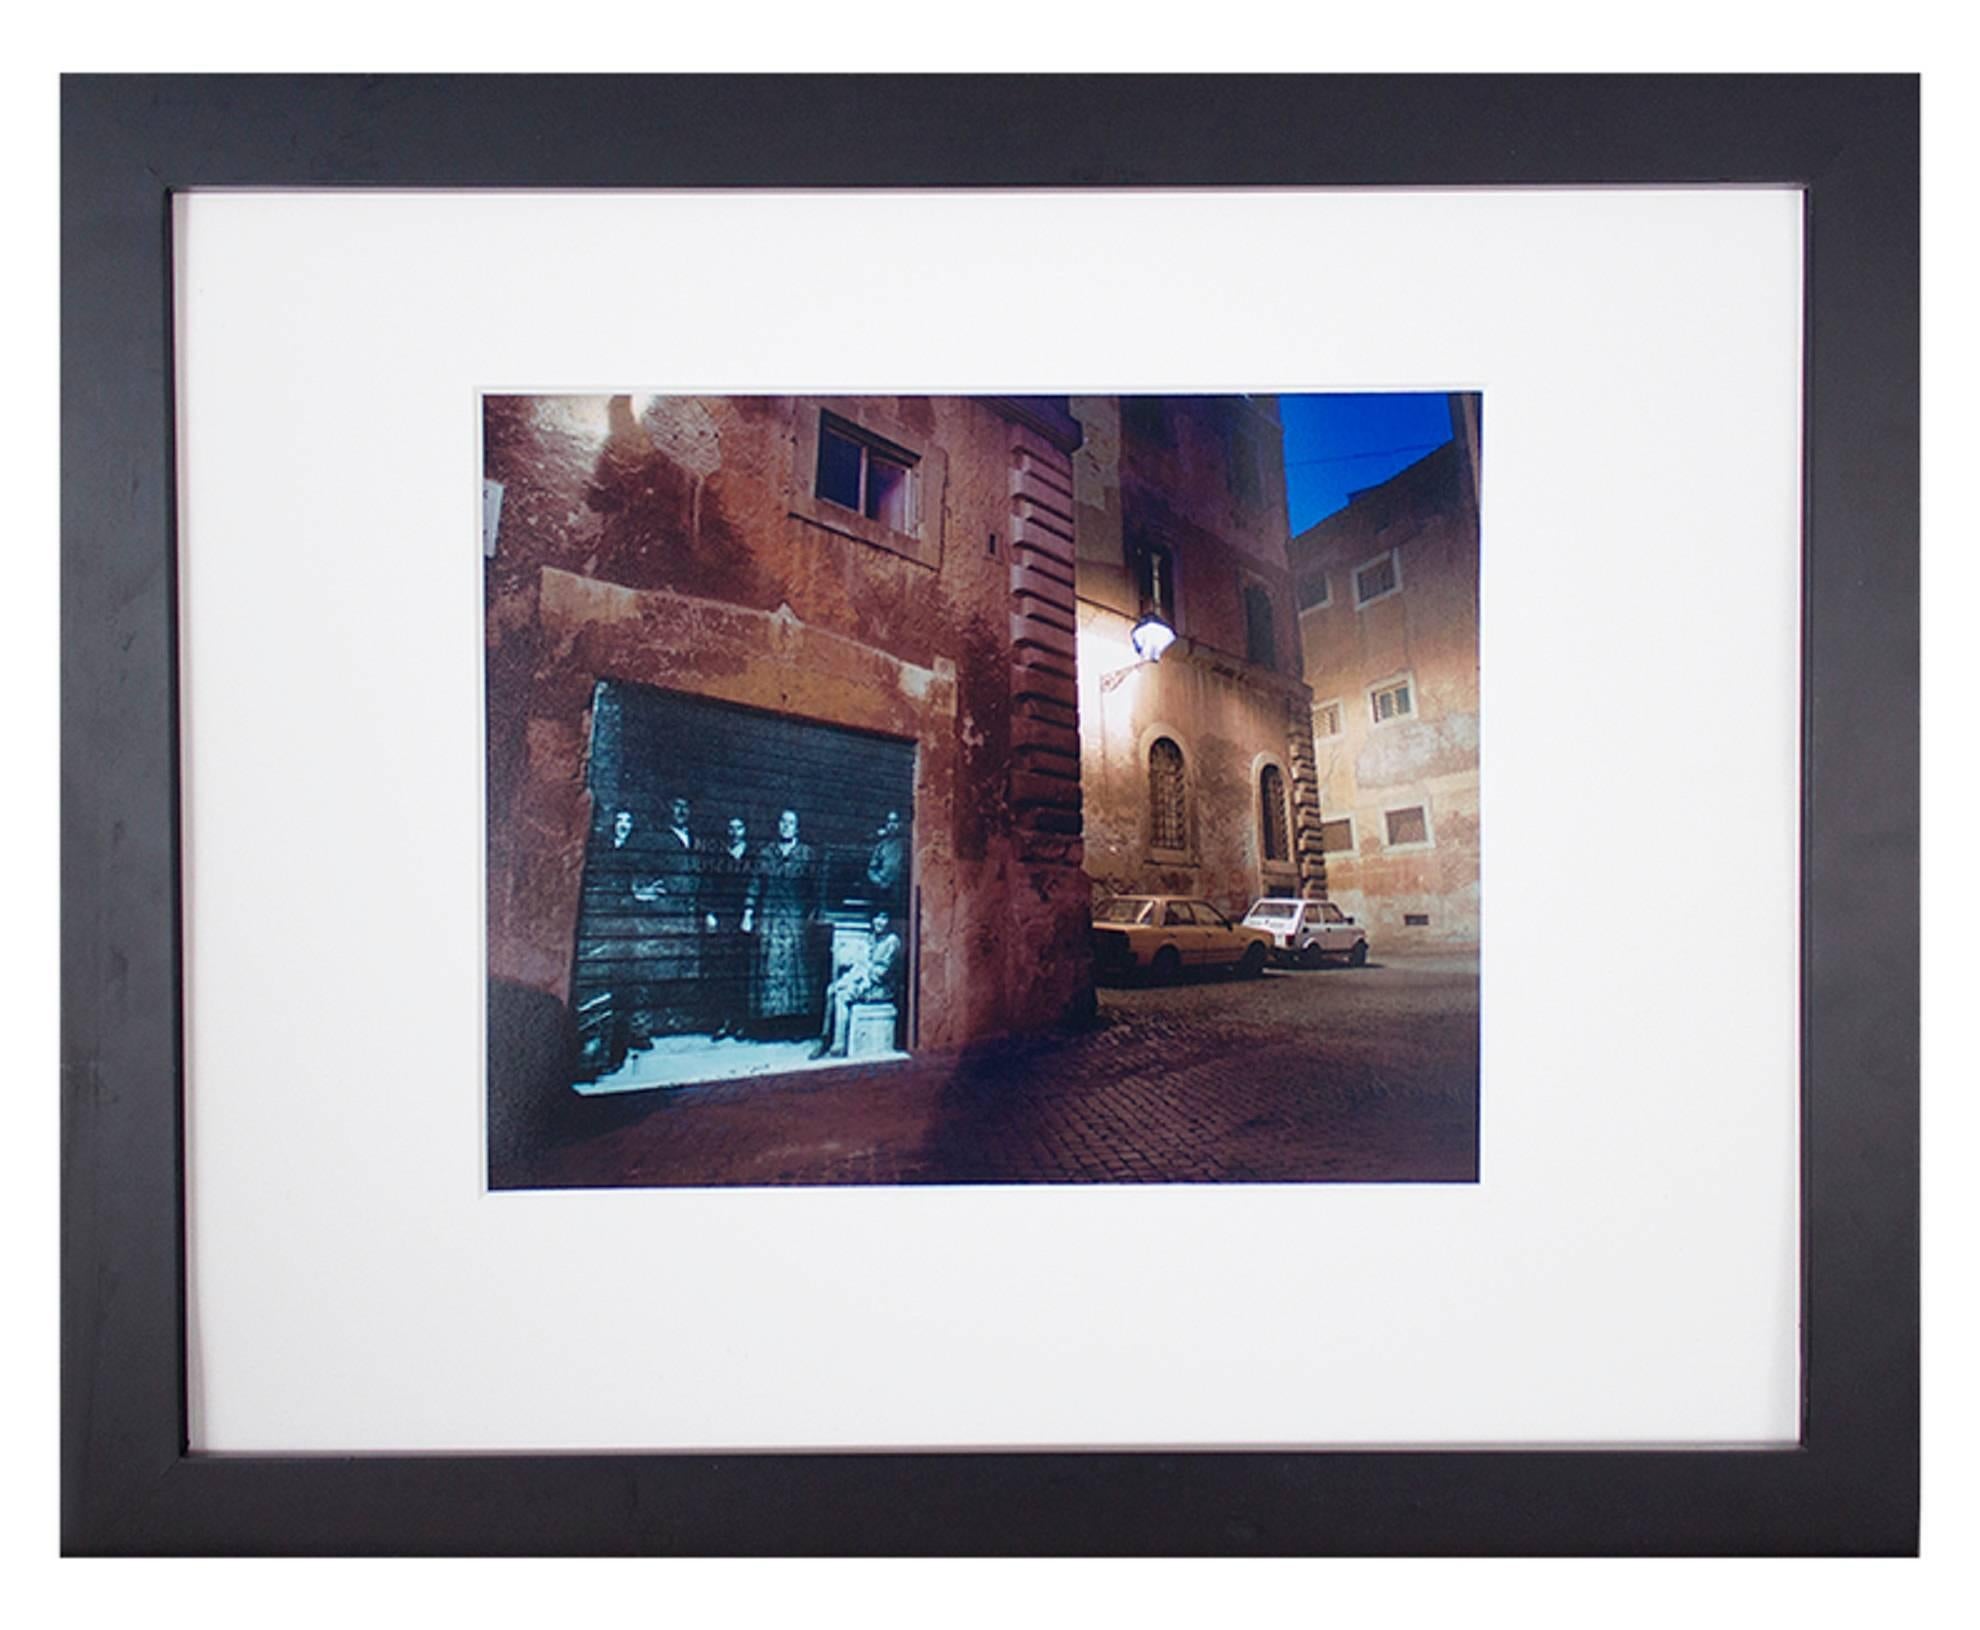 BEHIND PIAZZA MATTEI, ROME, ITALY Judaica Contemporary Photograph - Black Color Photograph by Shimon Attie